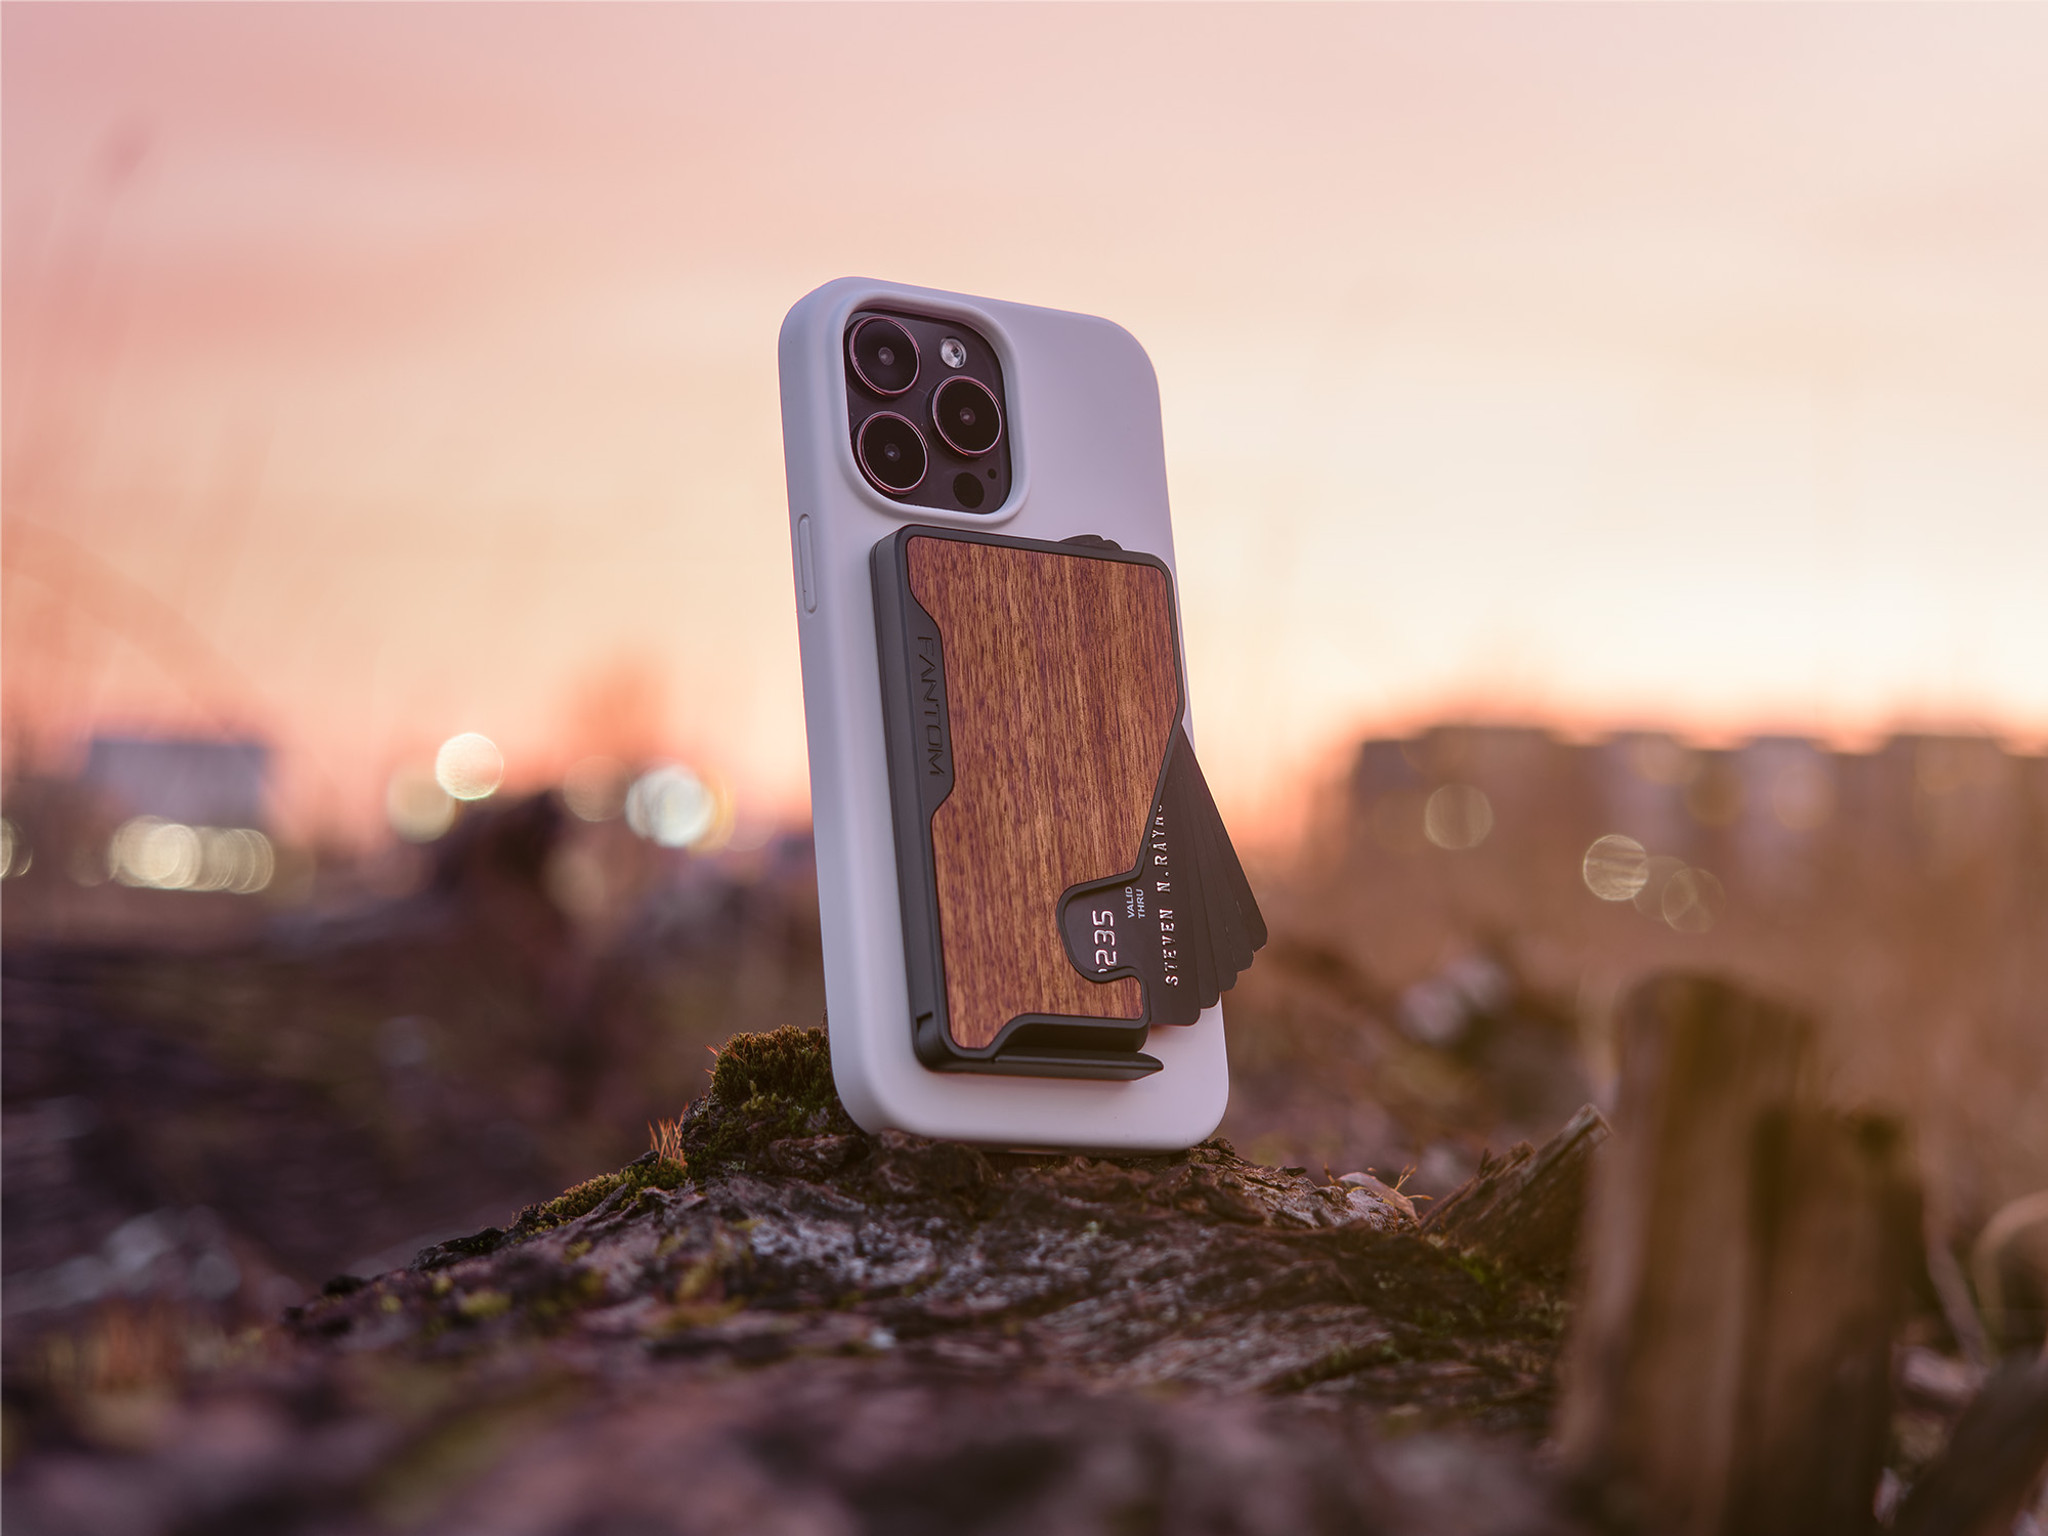 Mous Limitless 3.0 Walnut Case review: High-end style meets rugged  protection